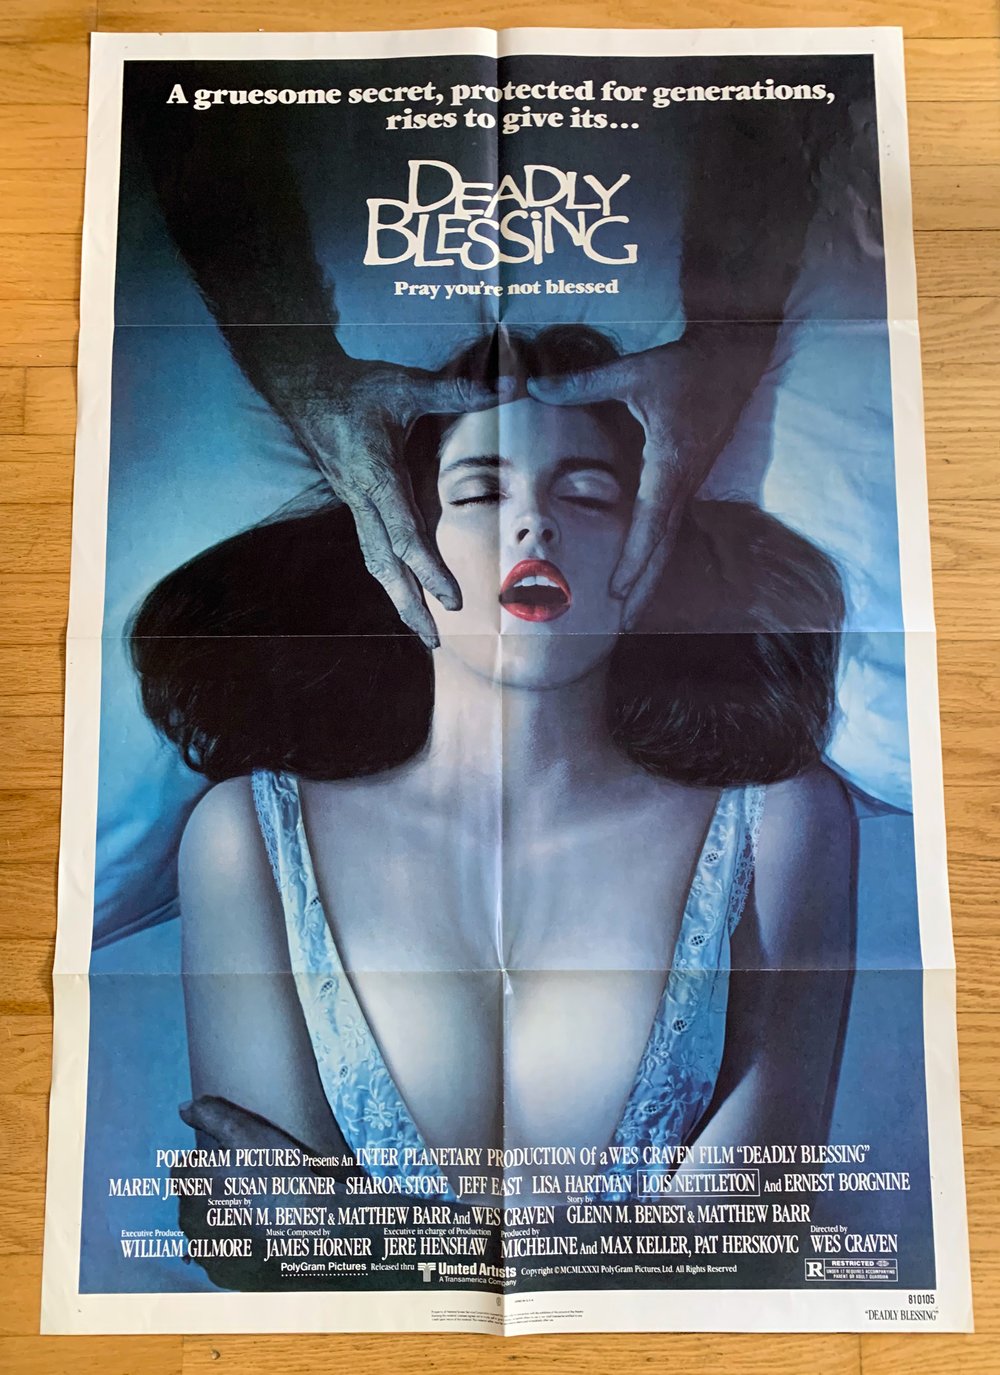 1981 DEADLY BLESSING Original U.S. One Sheet Movie Poster